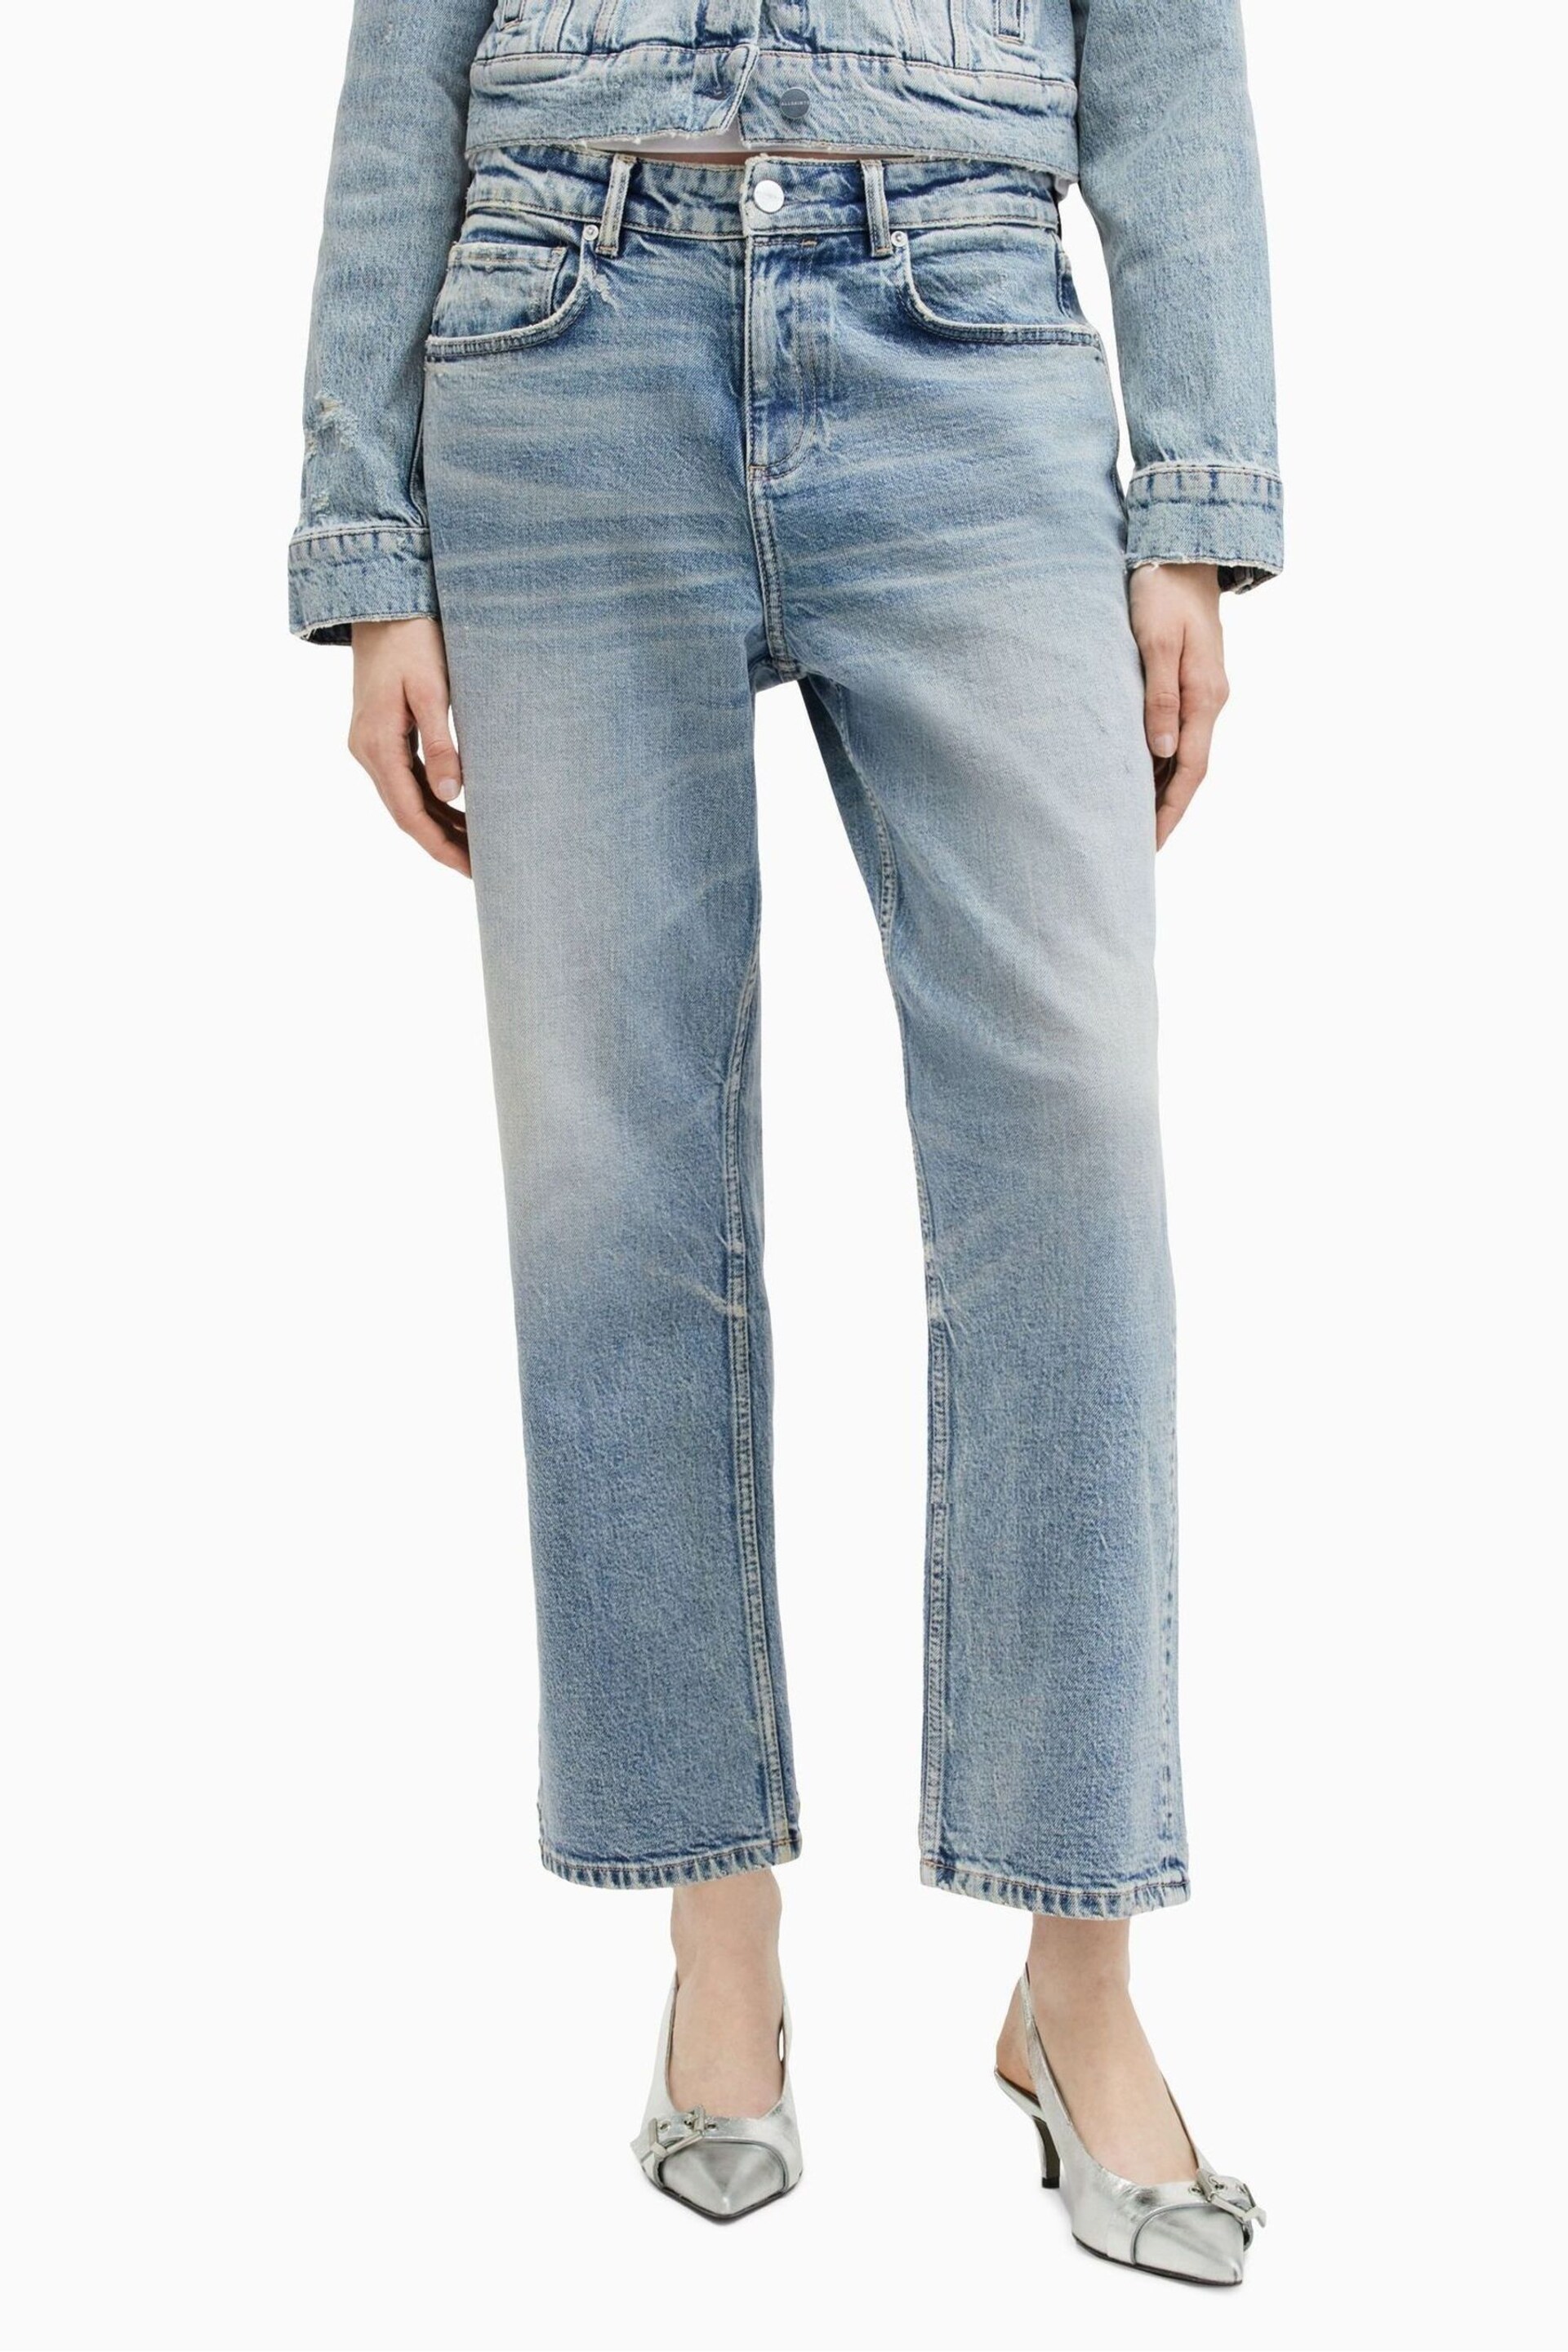 AllSaints Blue Ida Cropped Jeans - Image 6 of 7